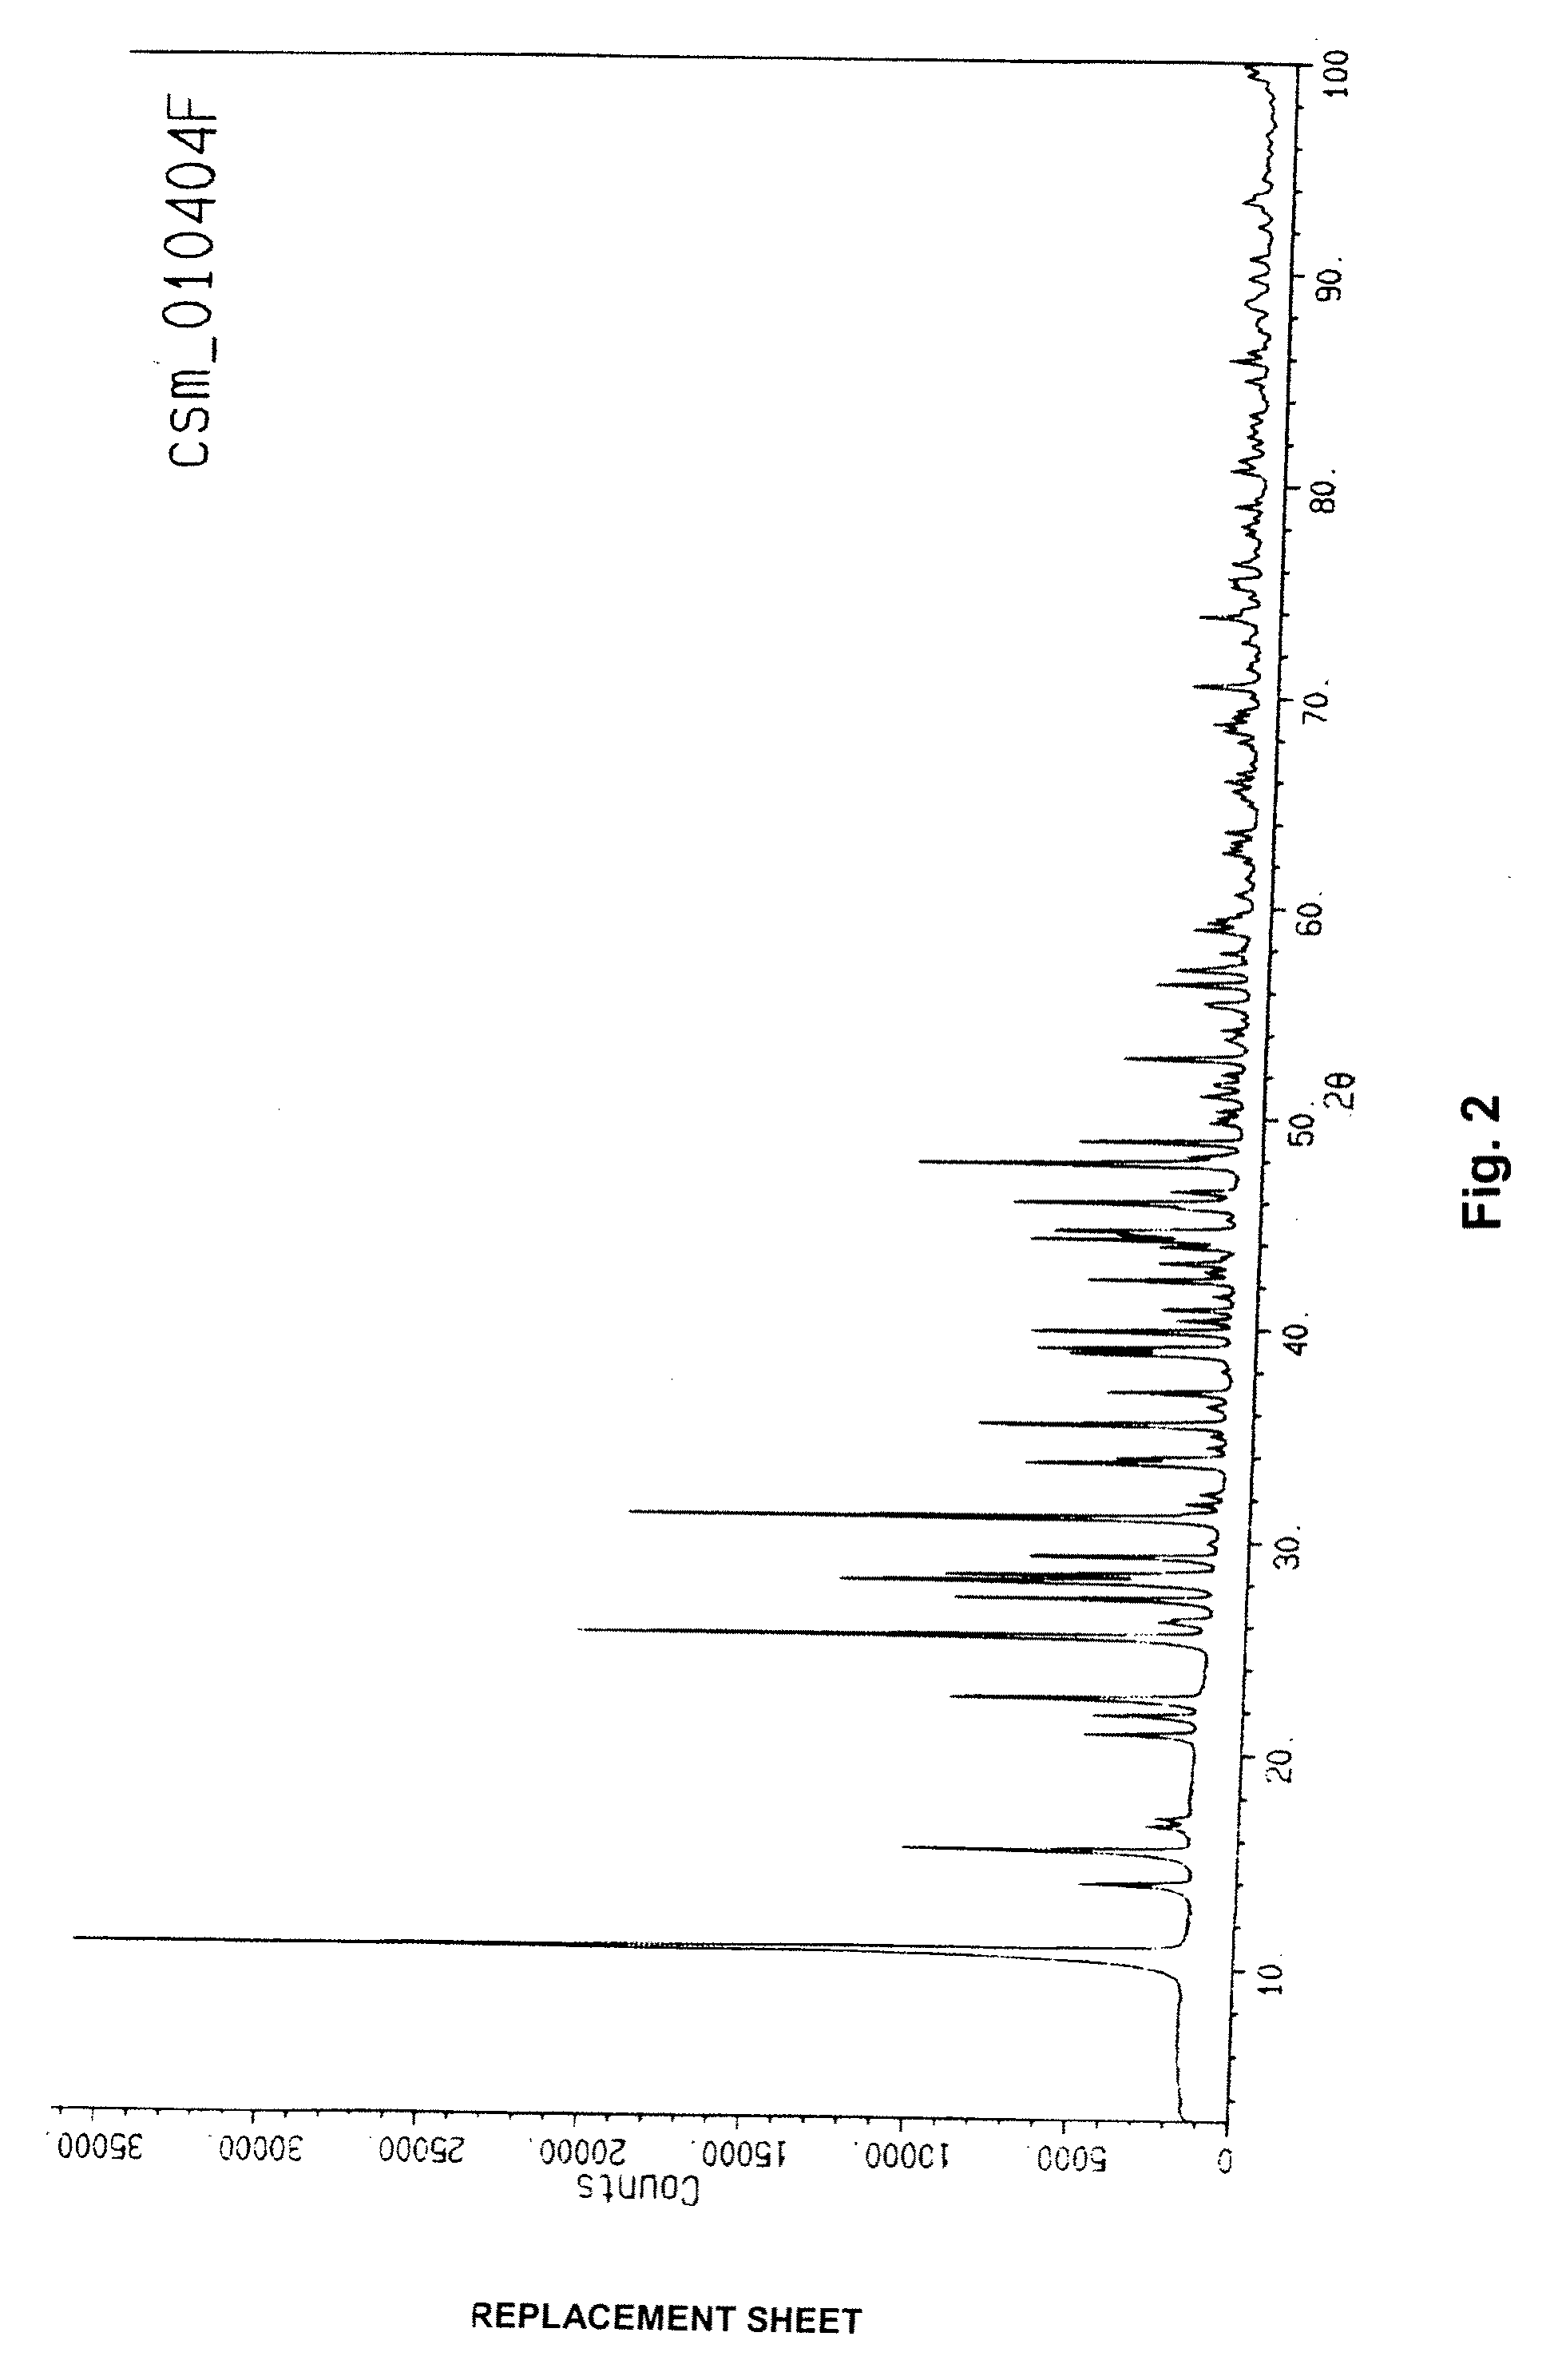 Controlled release composition containing a strontium salt